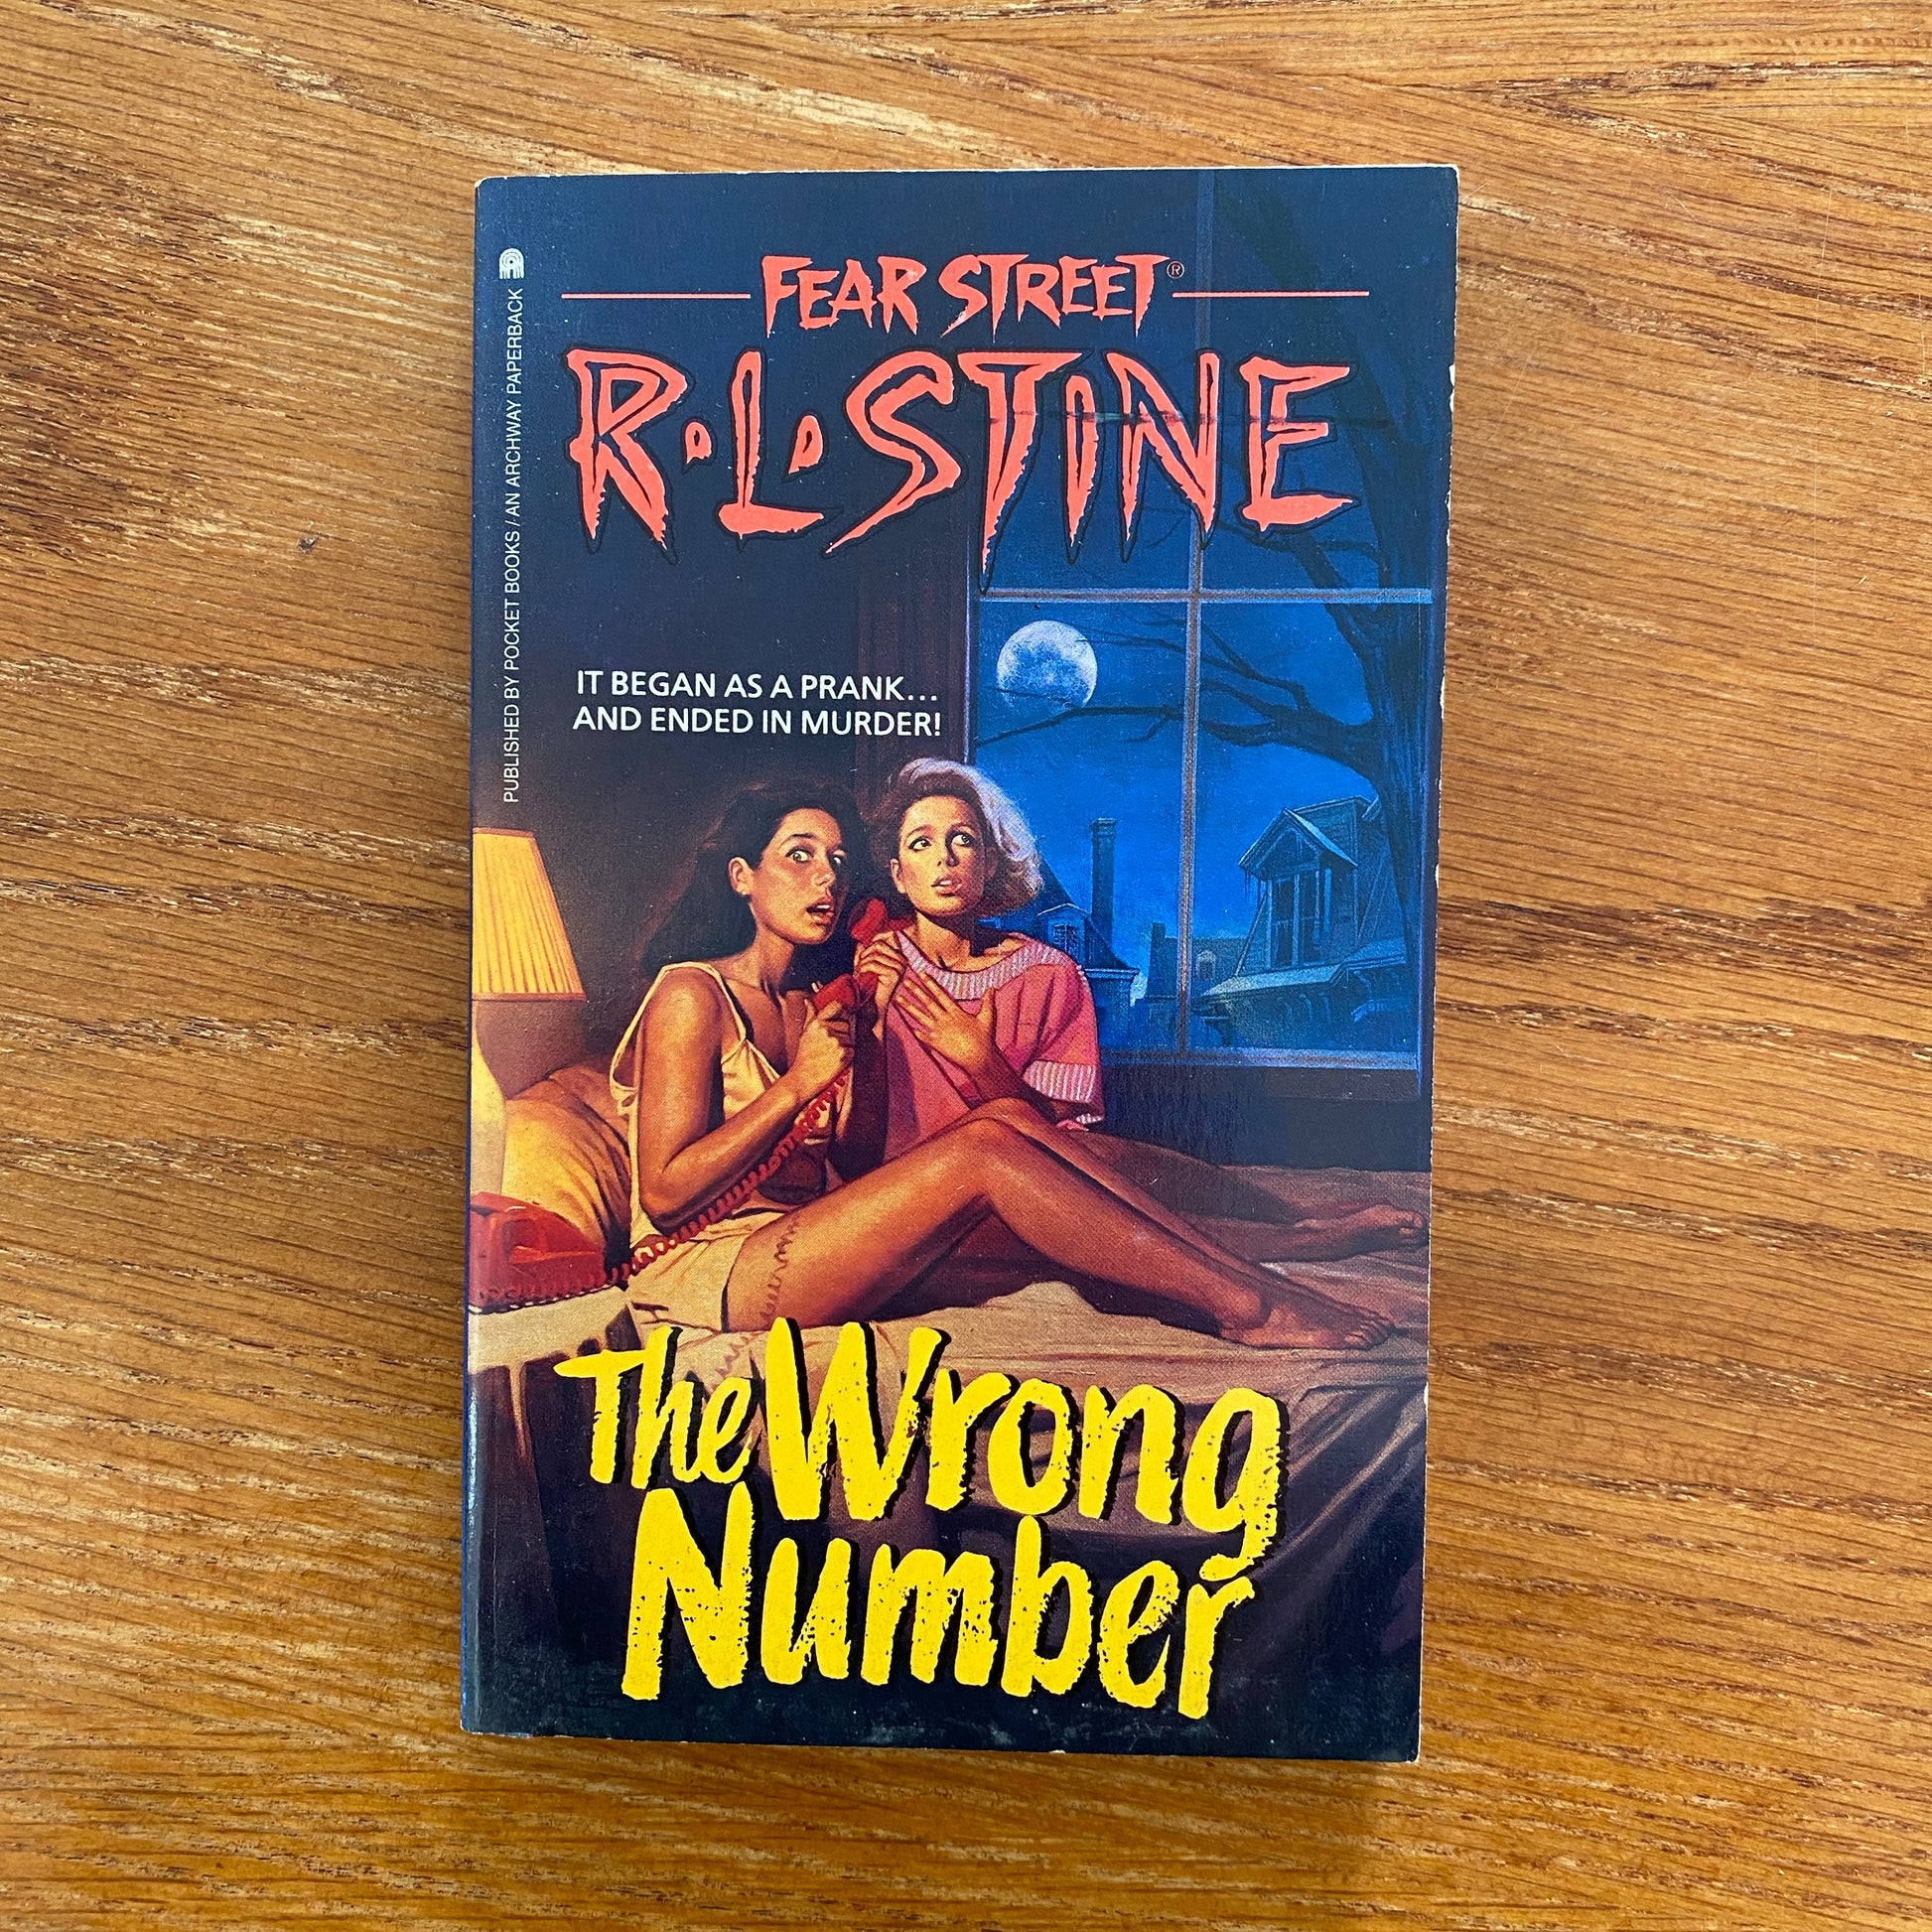 R.L Stine - Fear Street: The Wrong Number